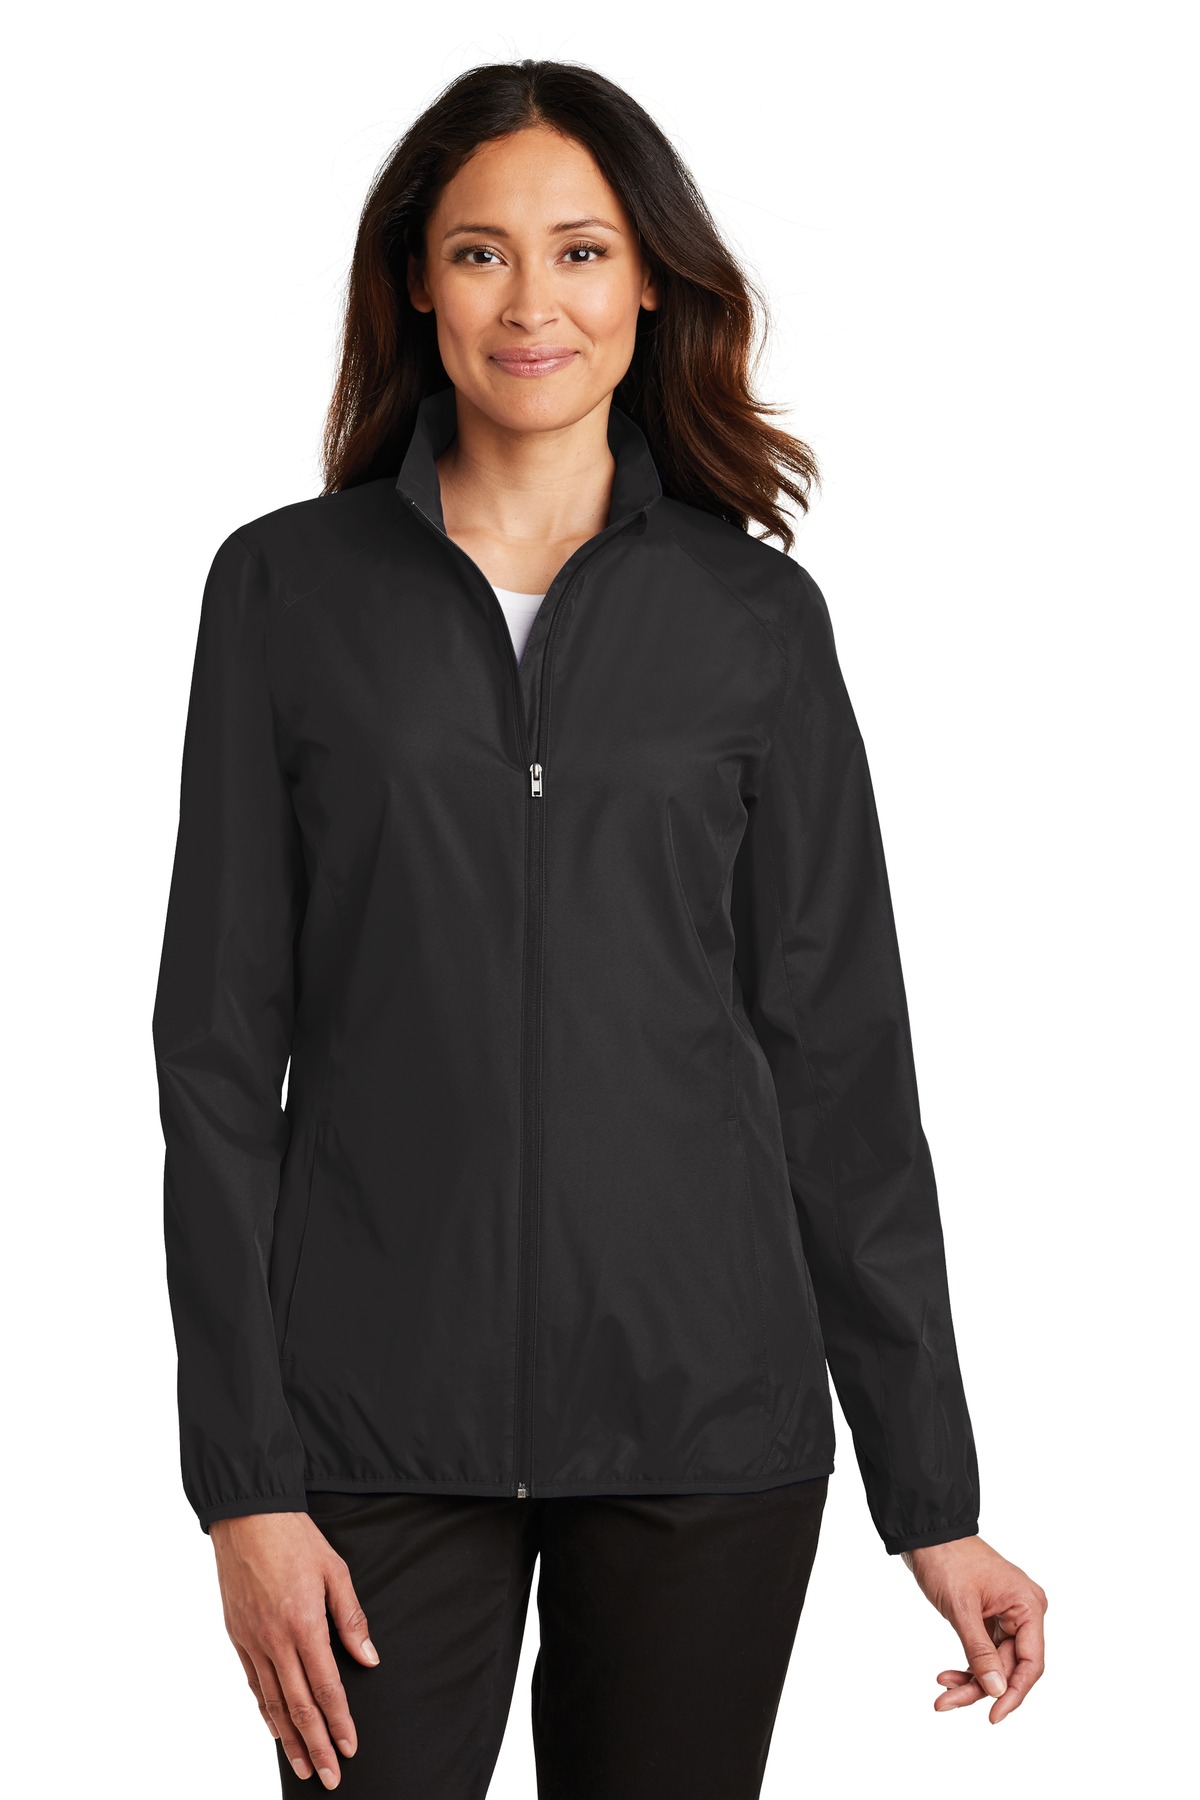 Port Authority Ladies Outerwear for Corporate & Hospitality ® Ladies Zephyr Full-Zip Jacket.-Port Authority